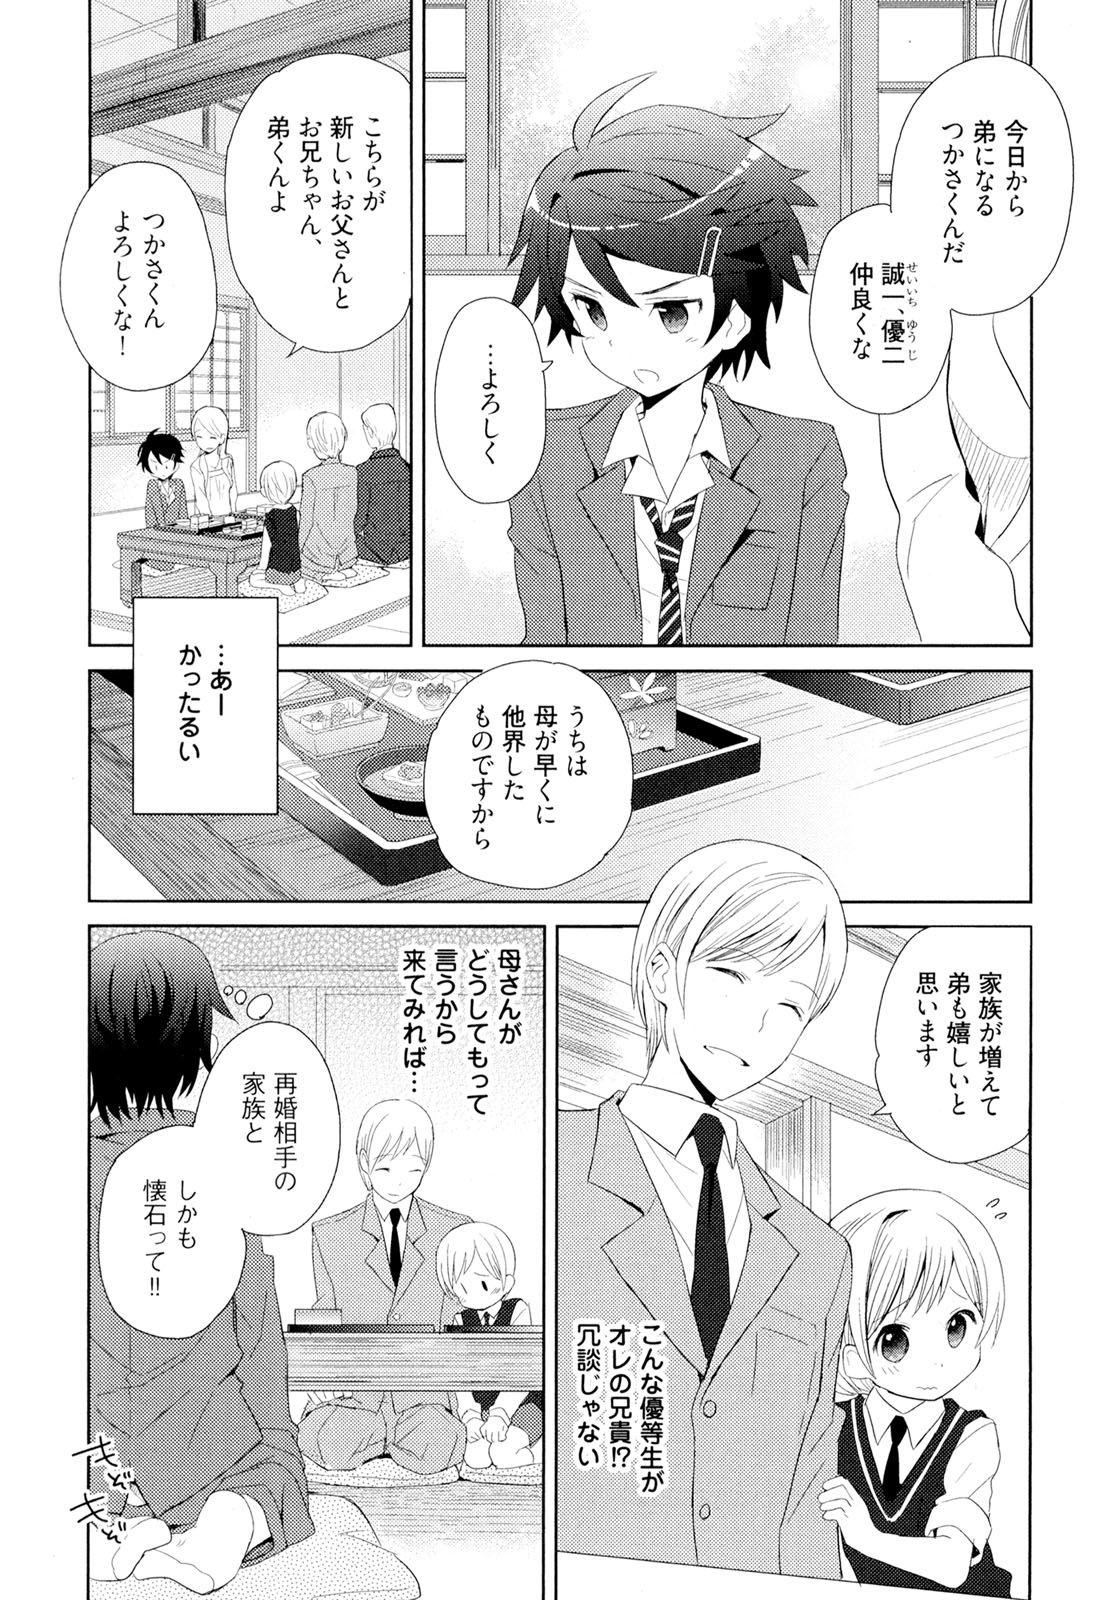 Gay Blondhair Otouto Shikake no Honey Trap - Lovely Younger Brother Honey Trap France - Page 5